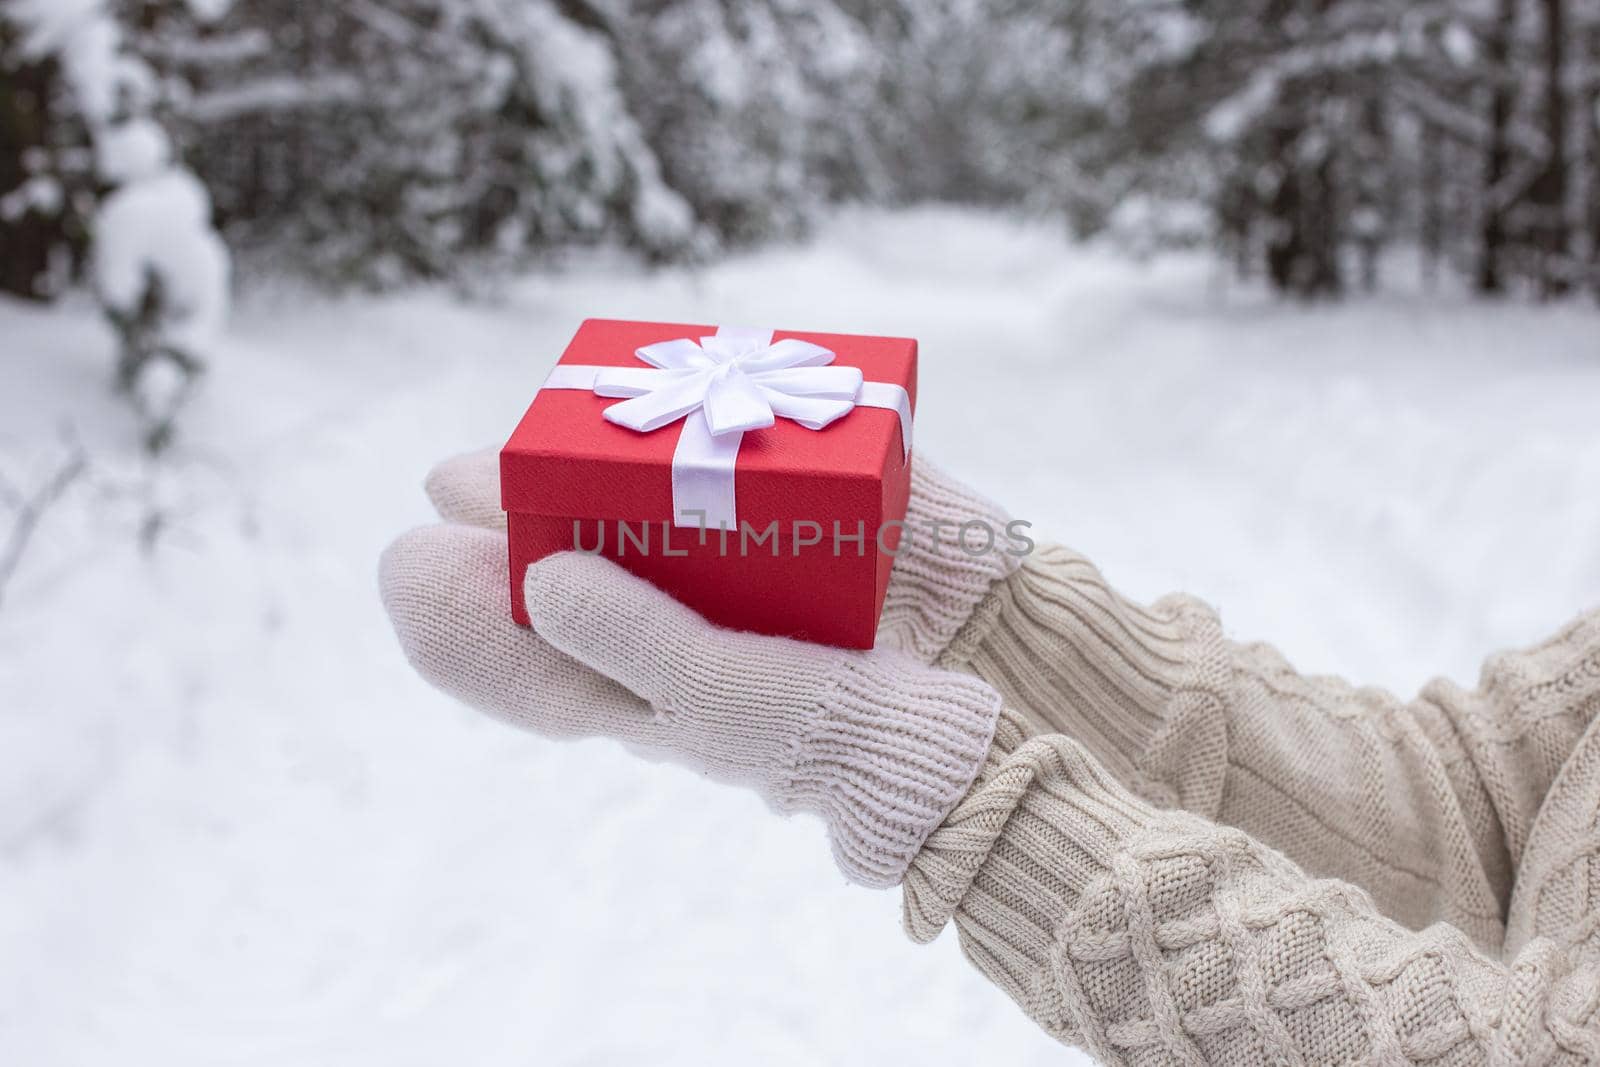 The girl's hands in white mittens and a white sweater are holding a red gift box against the background of a winter forest. Close-up